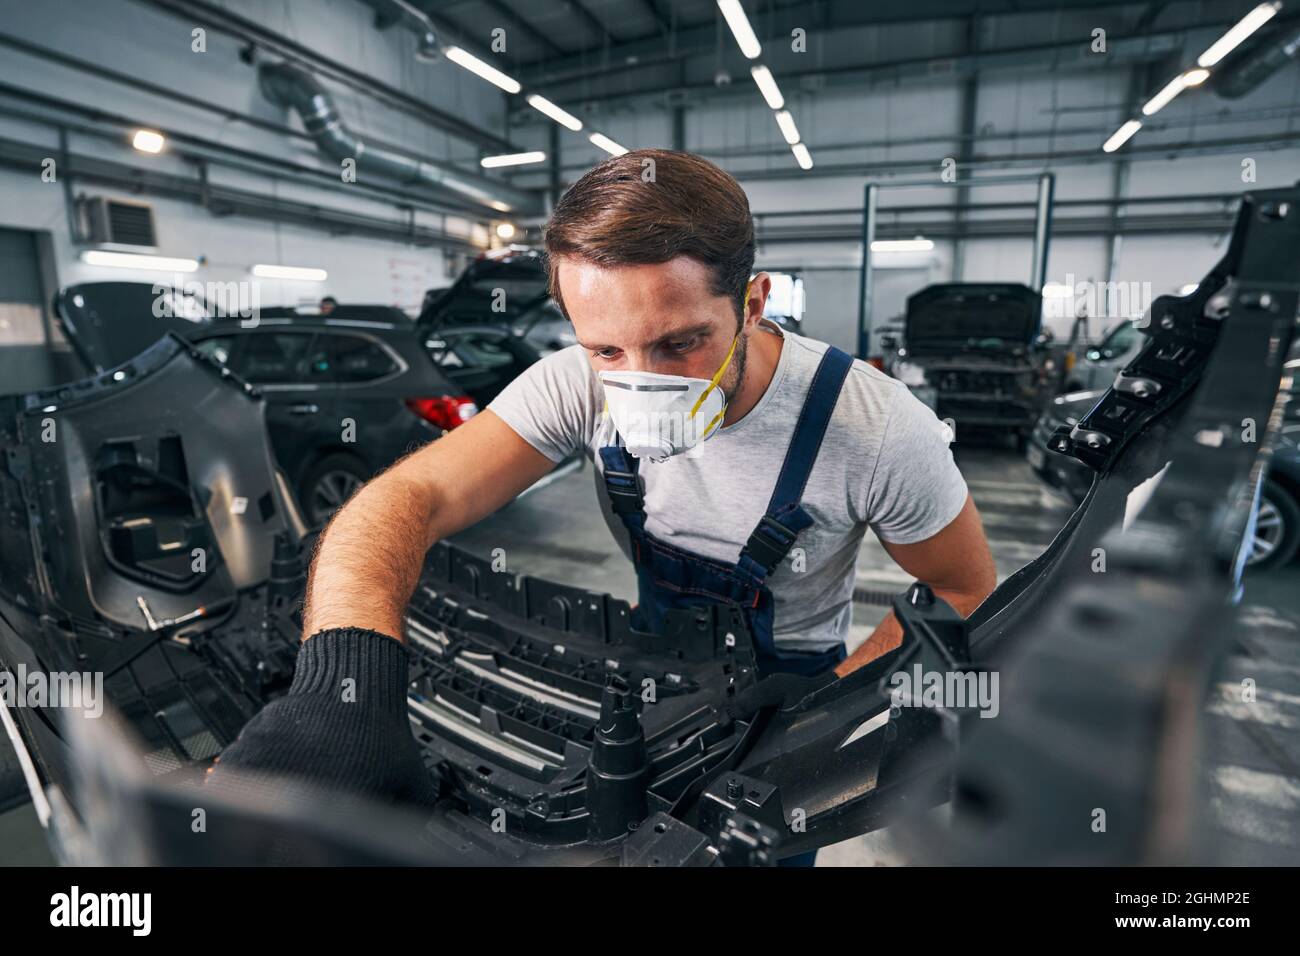 Automotive technician inspecting detail of a car Stock Photo